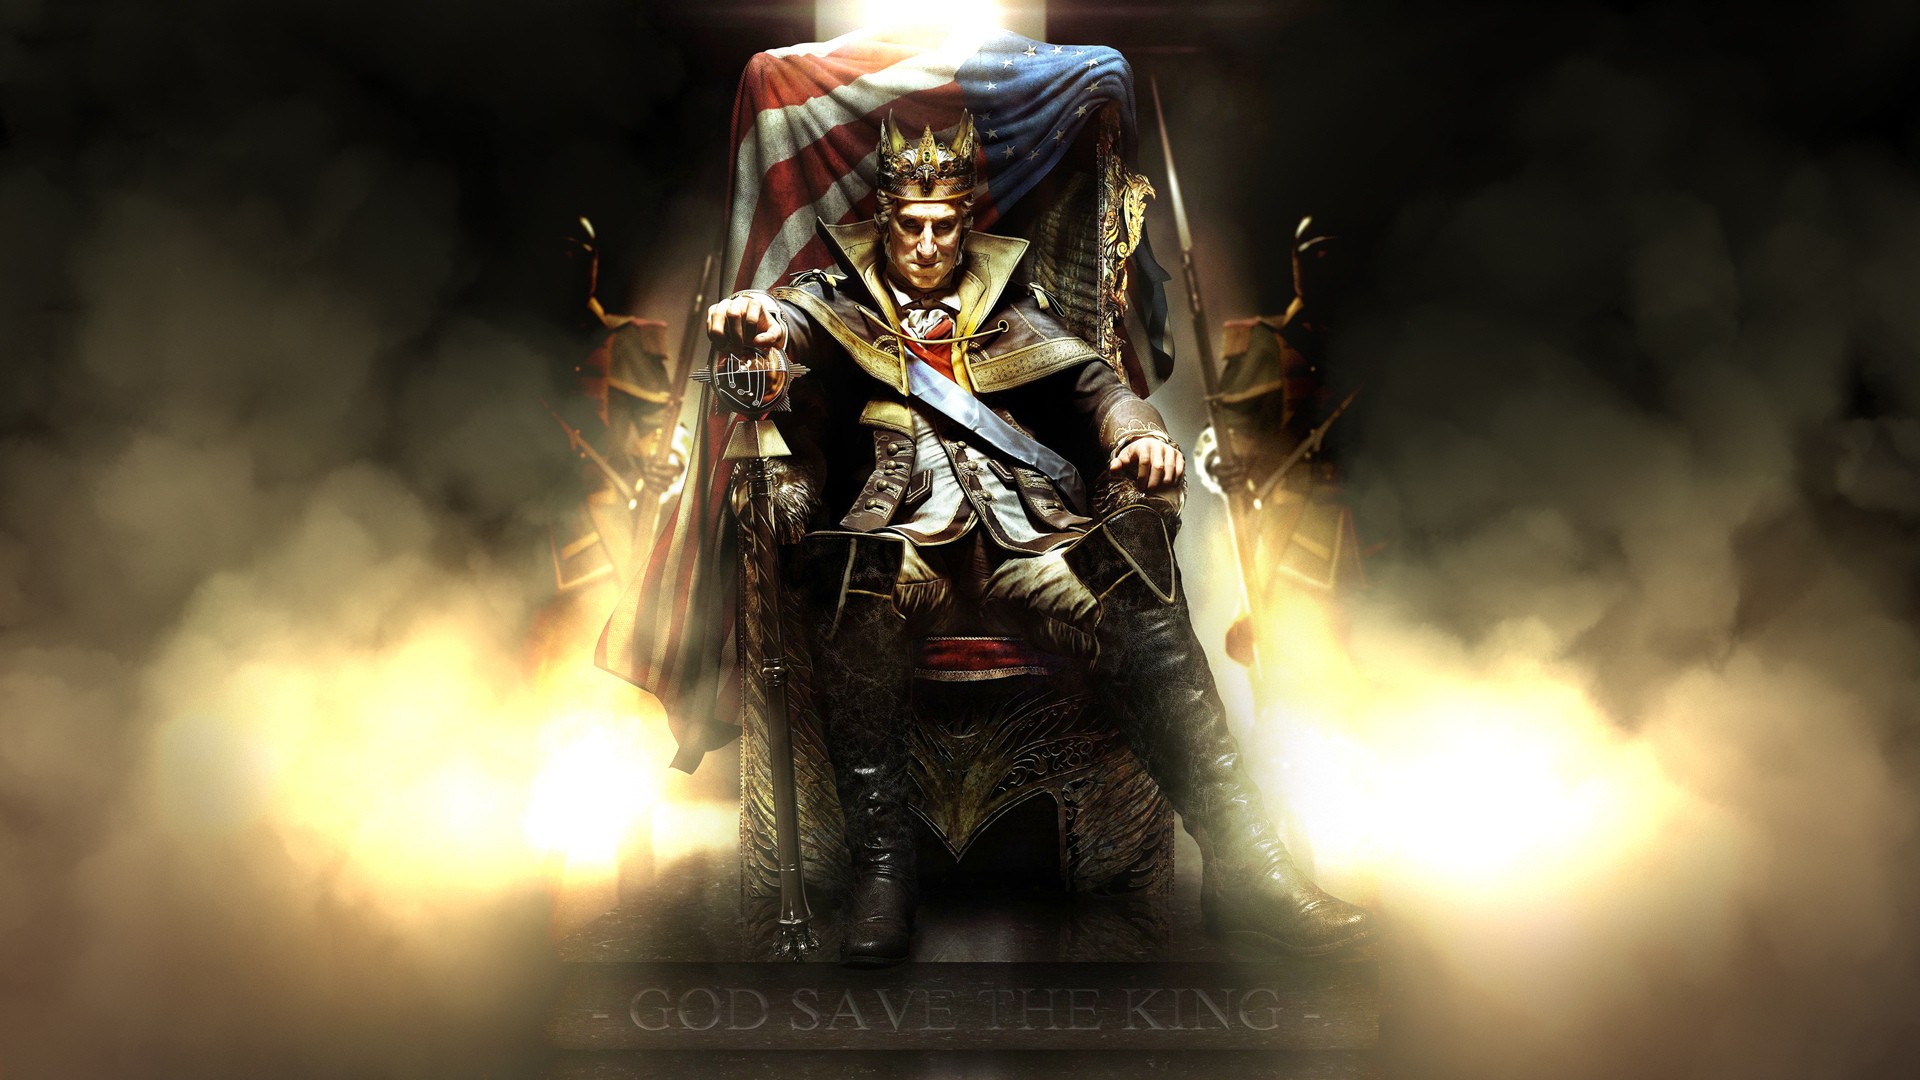 General 1920x1080 throne Assassin's Creed III video games PC gaming video game art Ubisoft